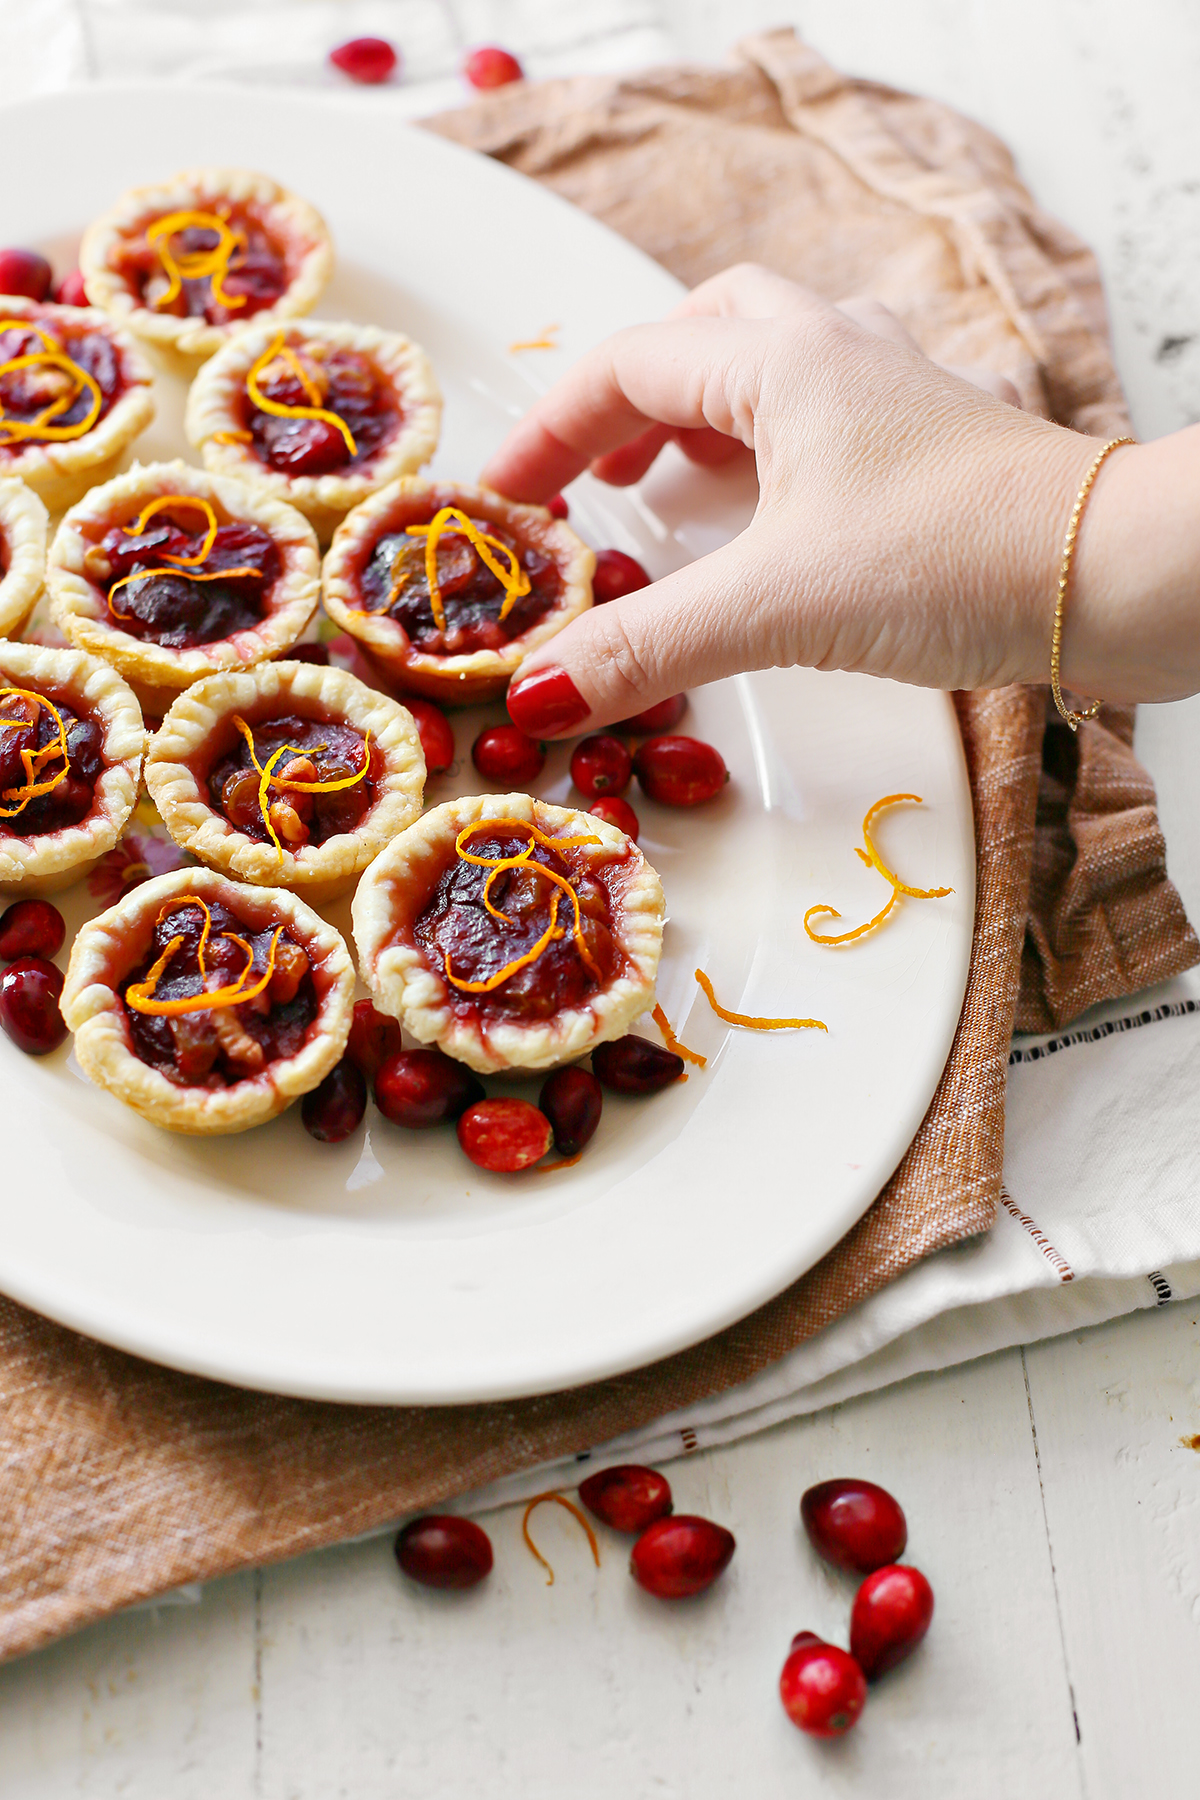 Mini Pie Making Kit from Table Talk Pies - Stylish Life for Moms